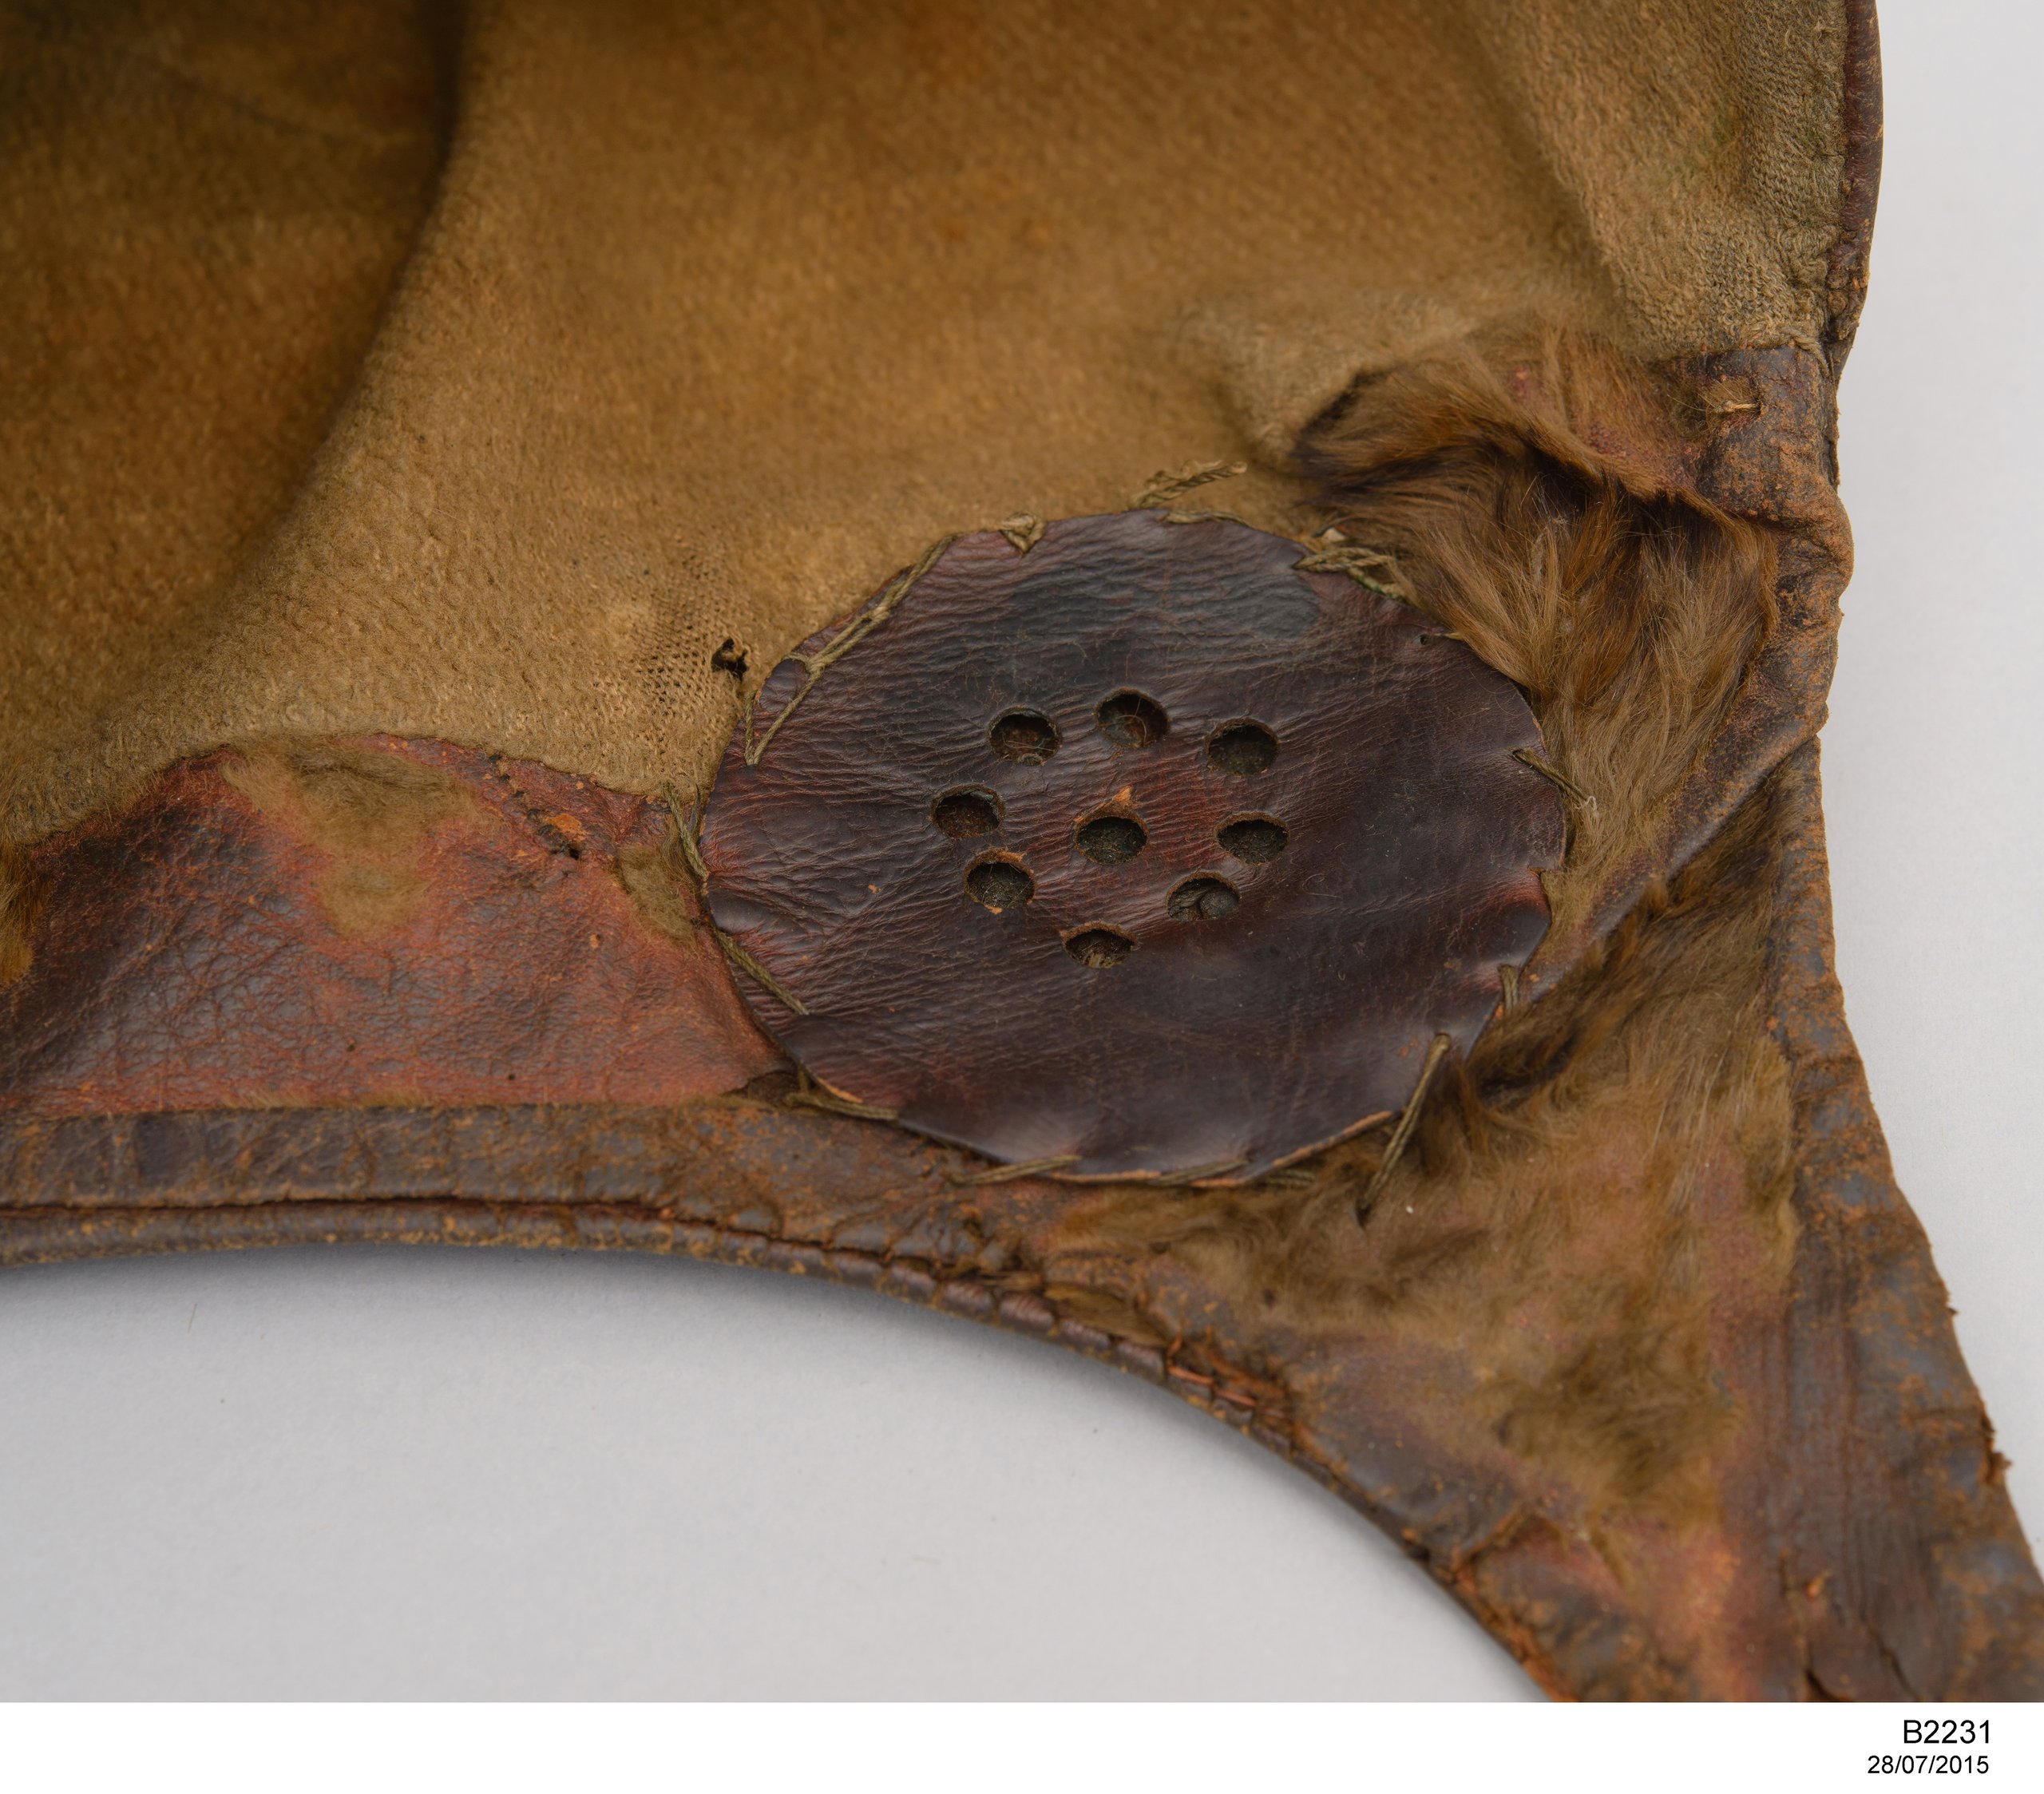 Flying helmet worn by Charles Kingsford Smith with fuel pipes from the 'Southern Cross'